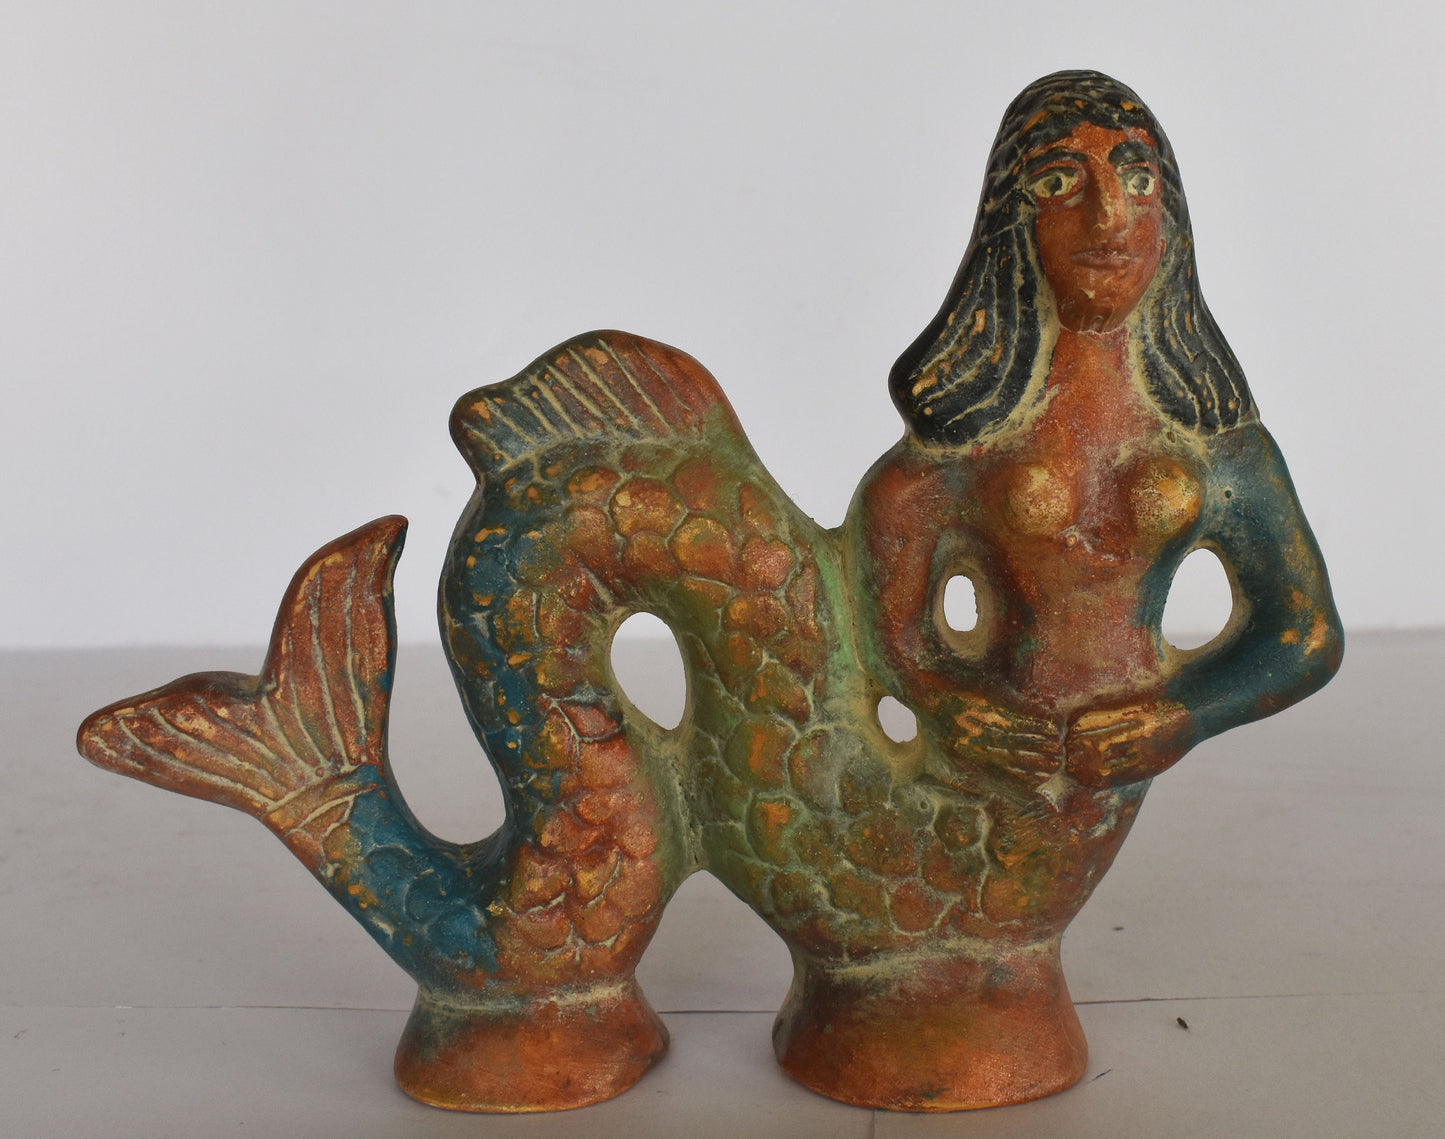 Siren - Daughter of the River God Achelous - Homer's Odyssey - 600 BC - Museum Reproduction  - Ceramic Artifact